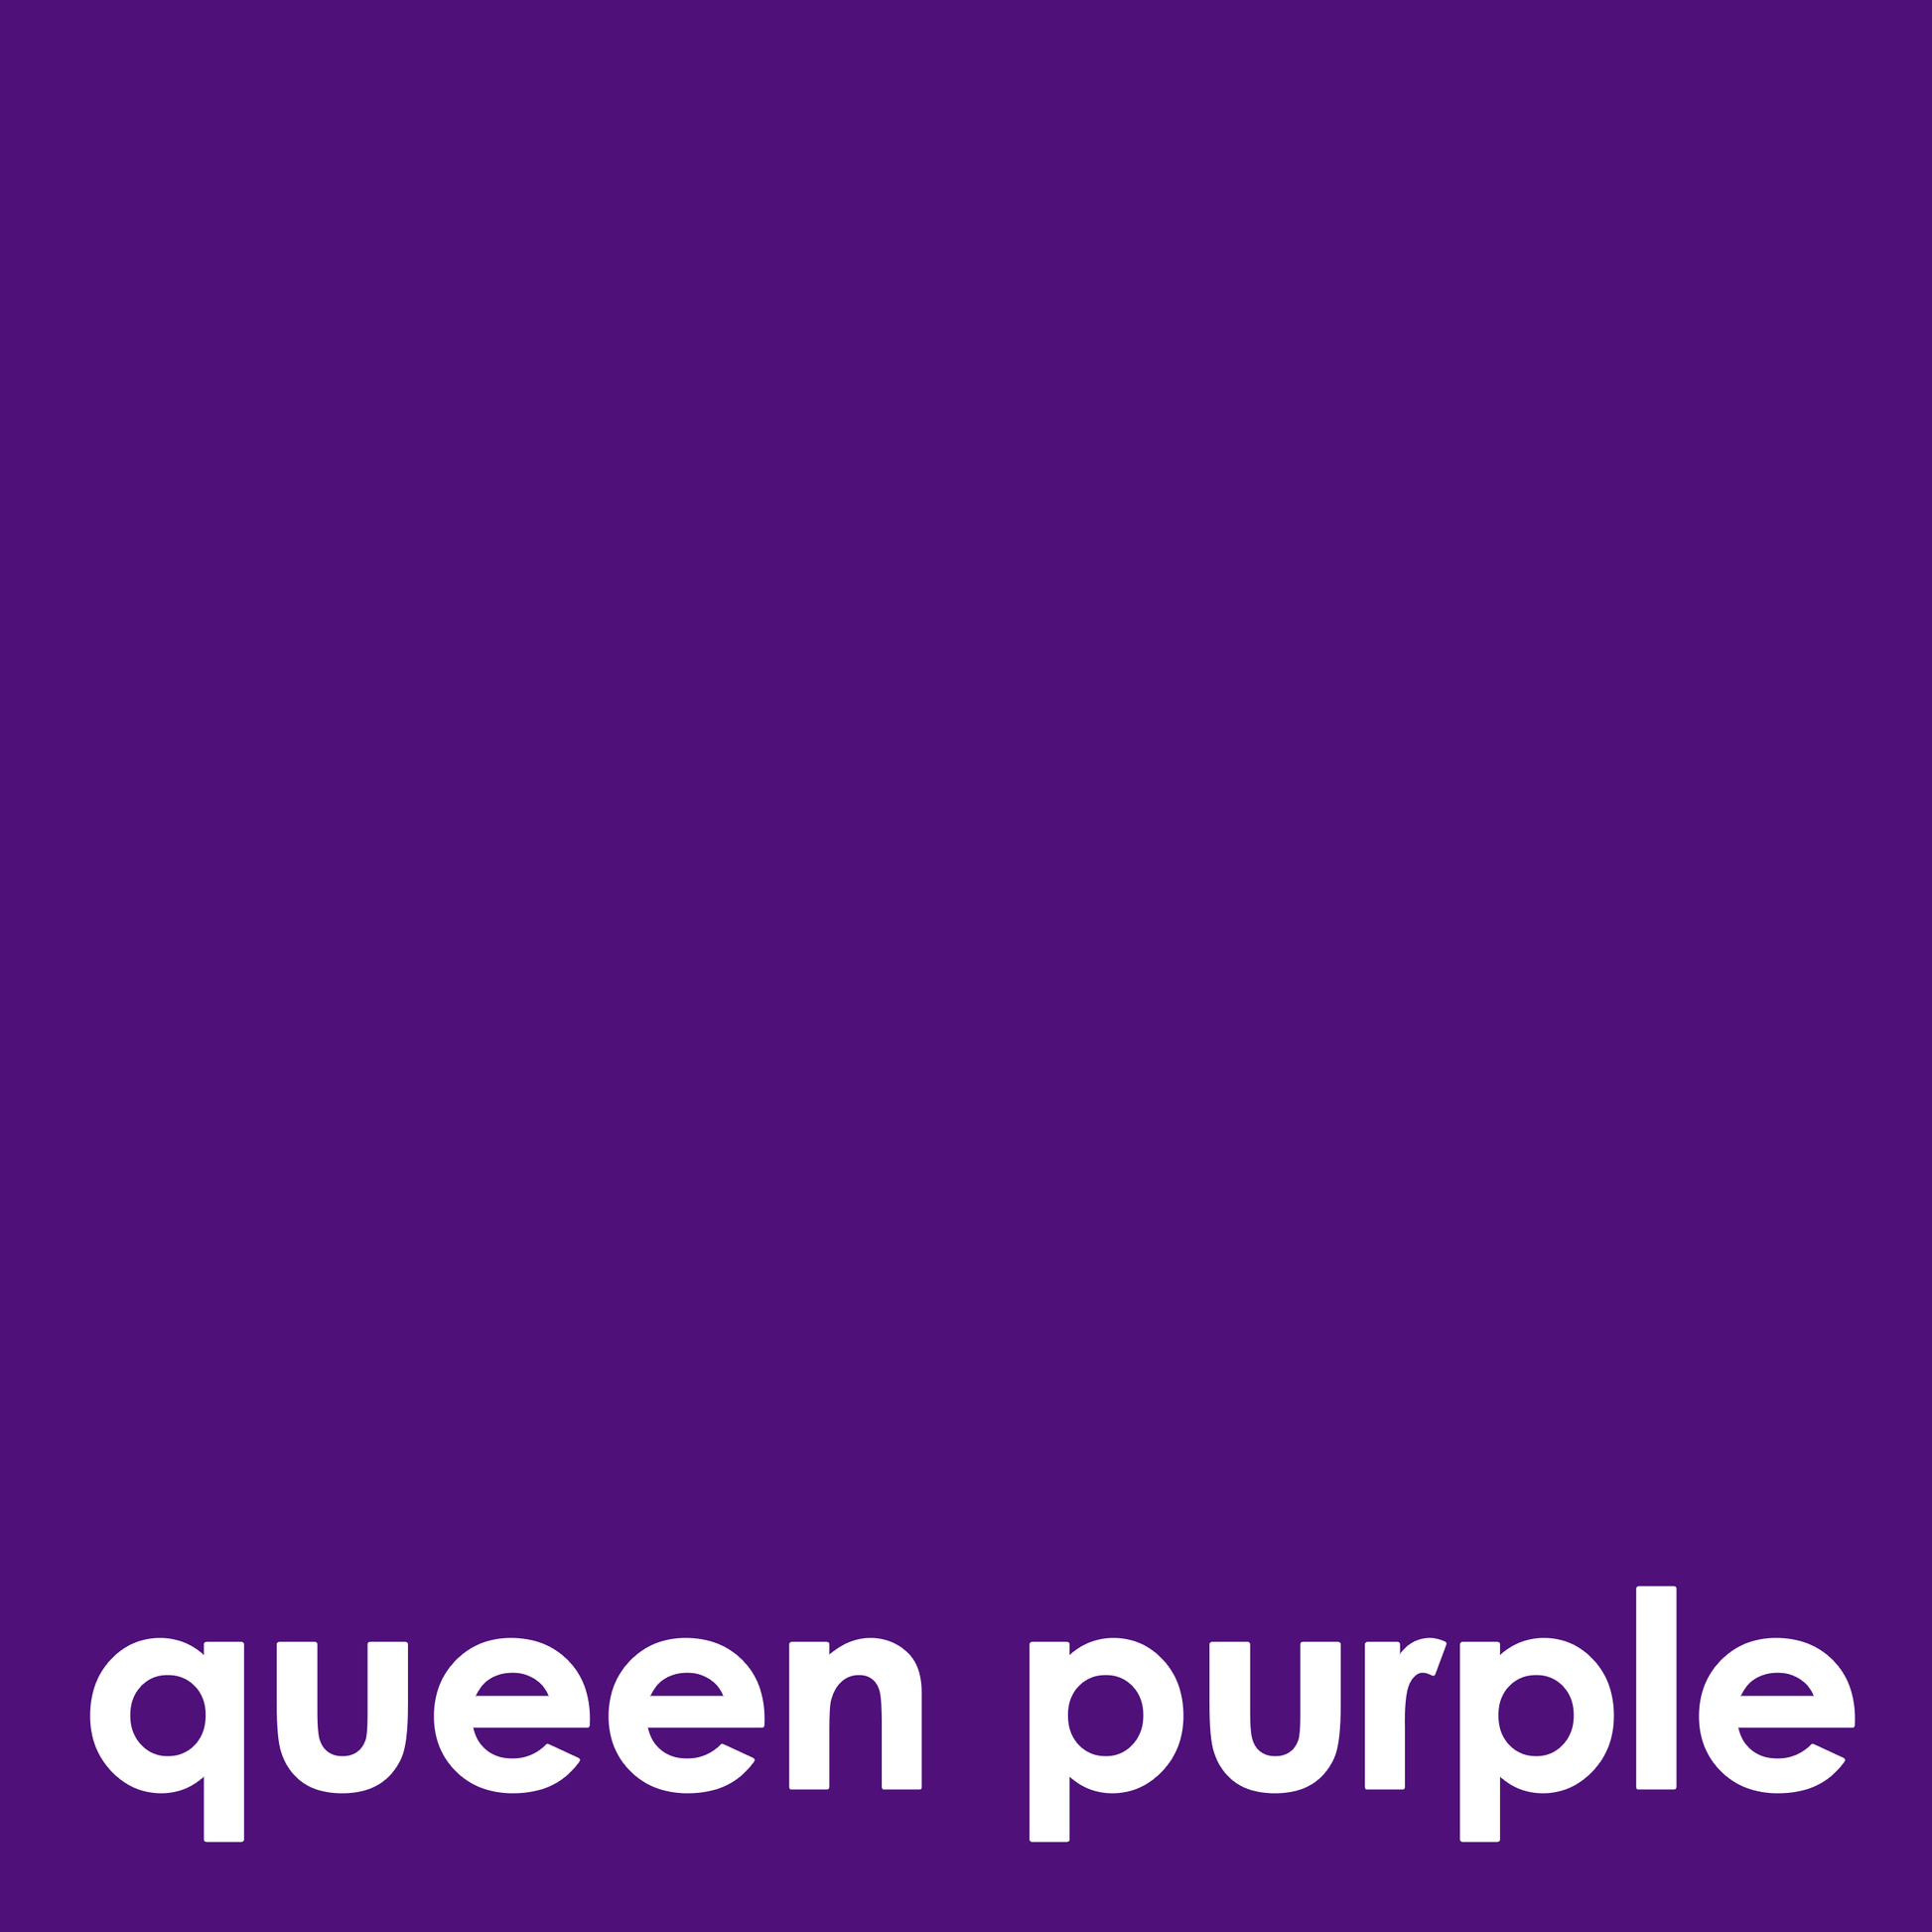 Purple background with white text that reads "queen purple".